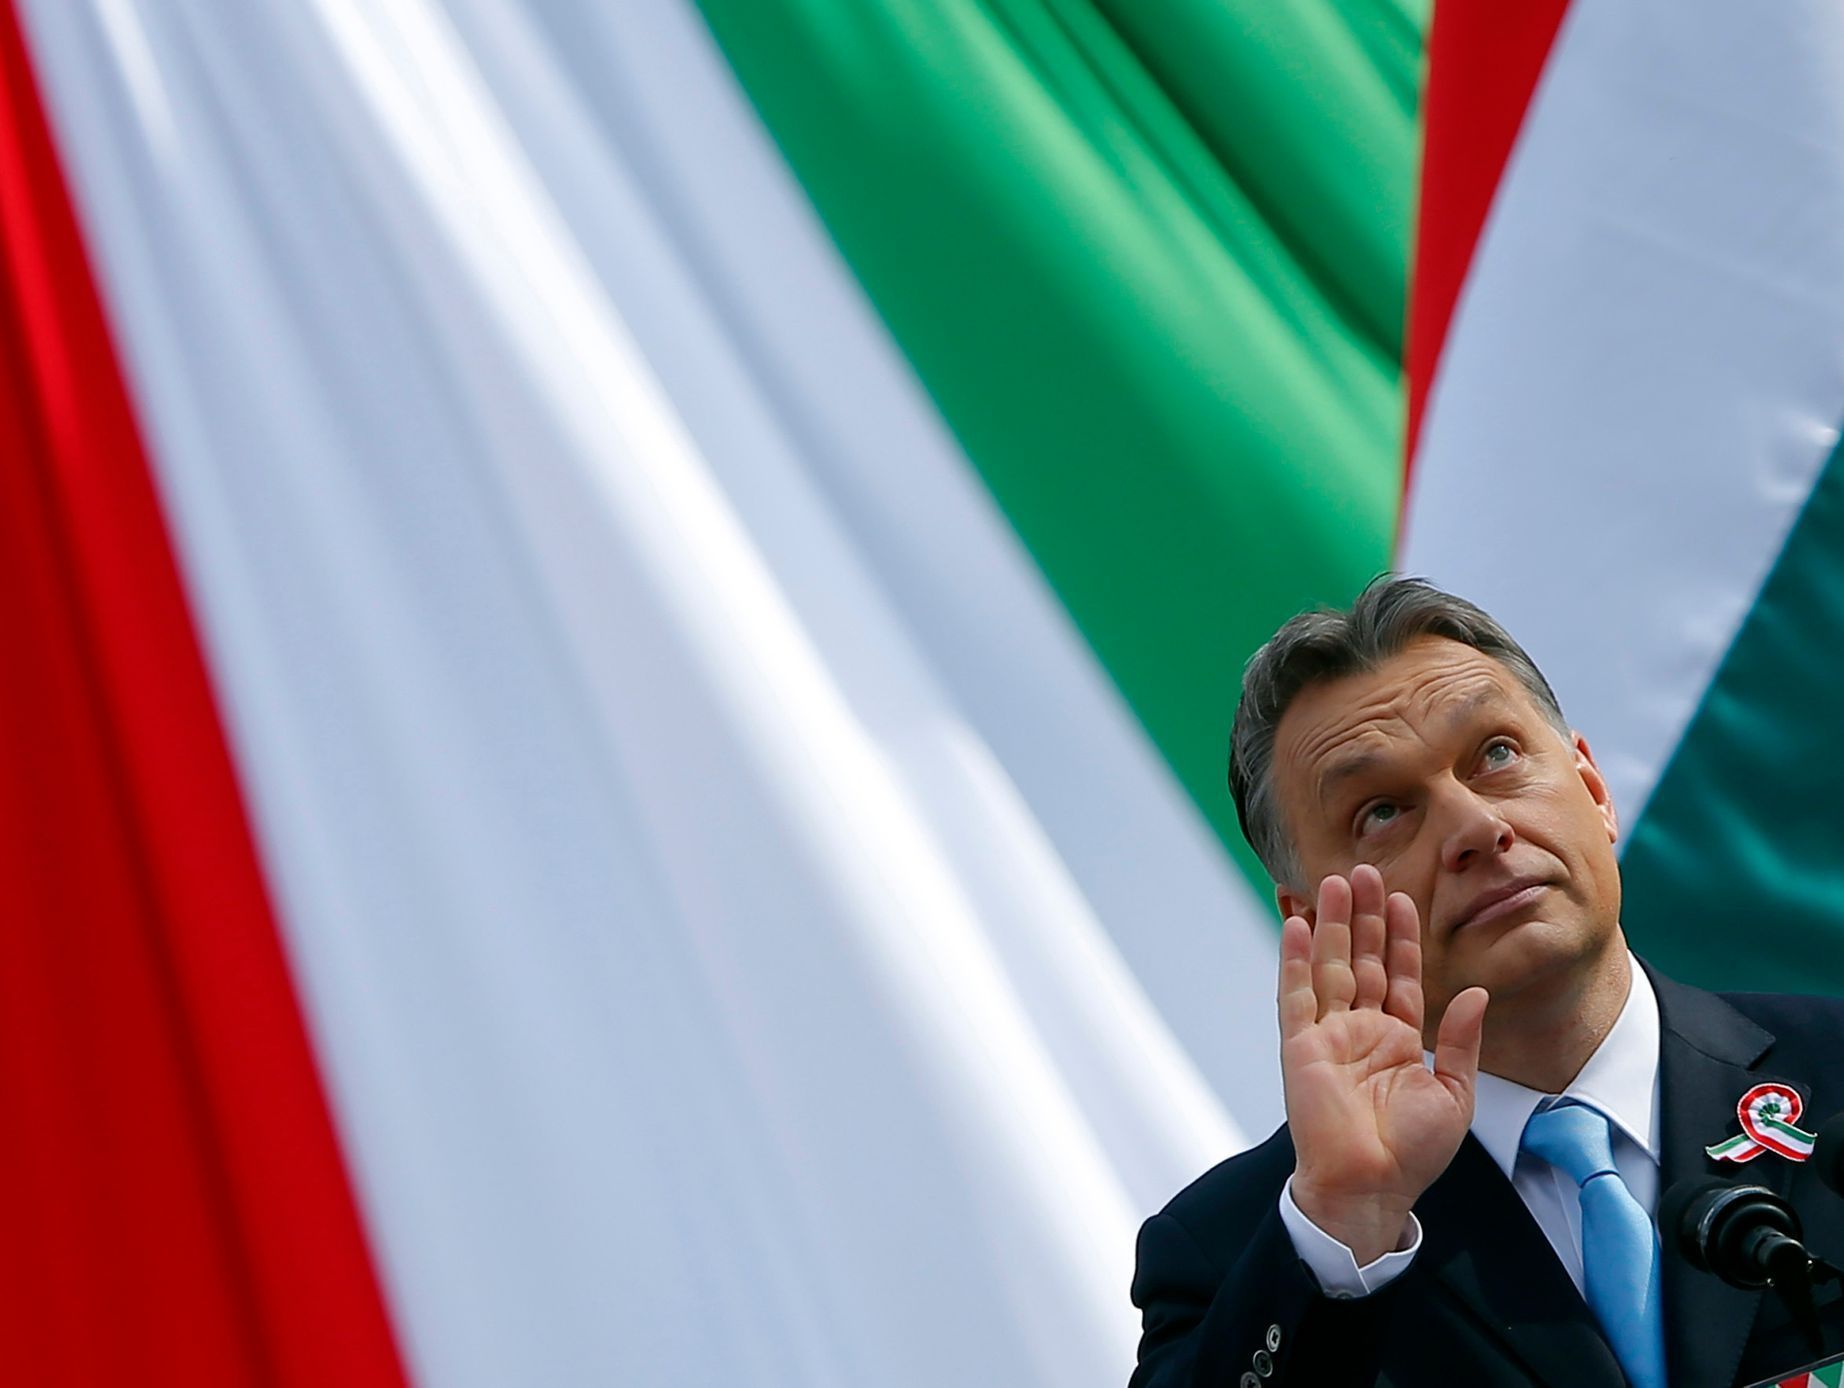 Hungarian Prime Minister Orban waves as he delivers a speech during the 166th anniversary of the anti-Habsburg revolution in Budapest